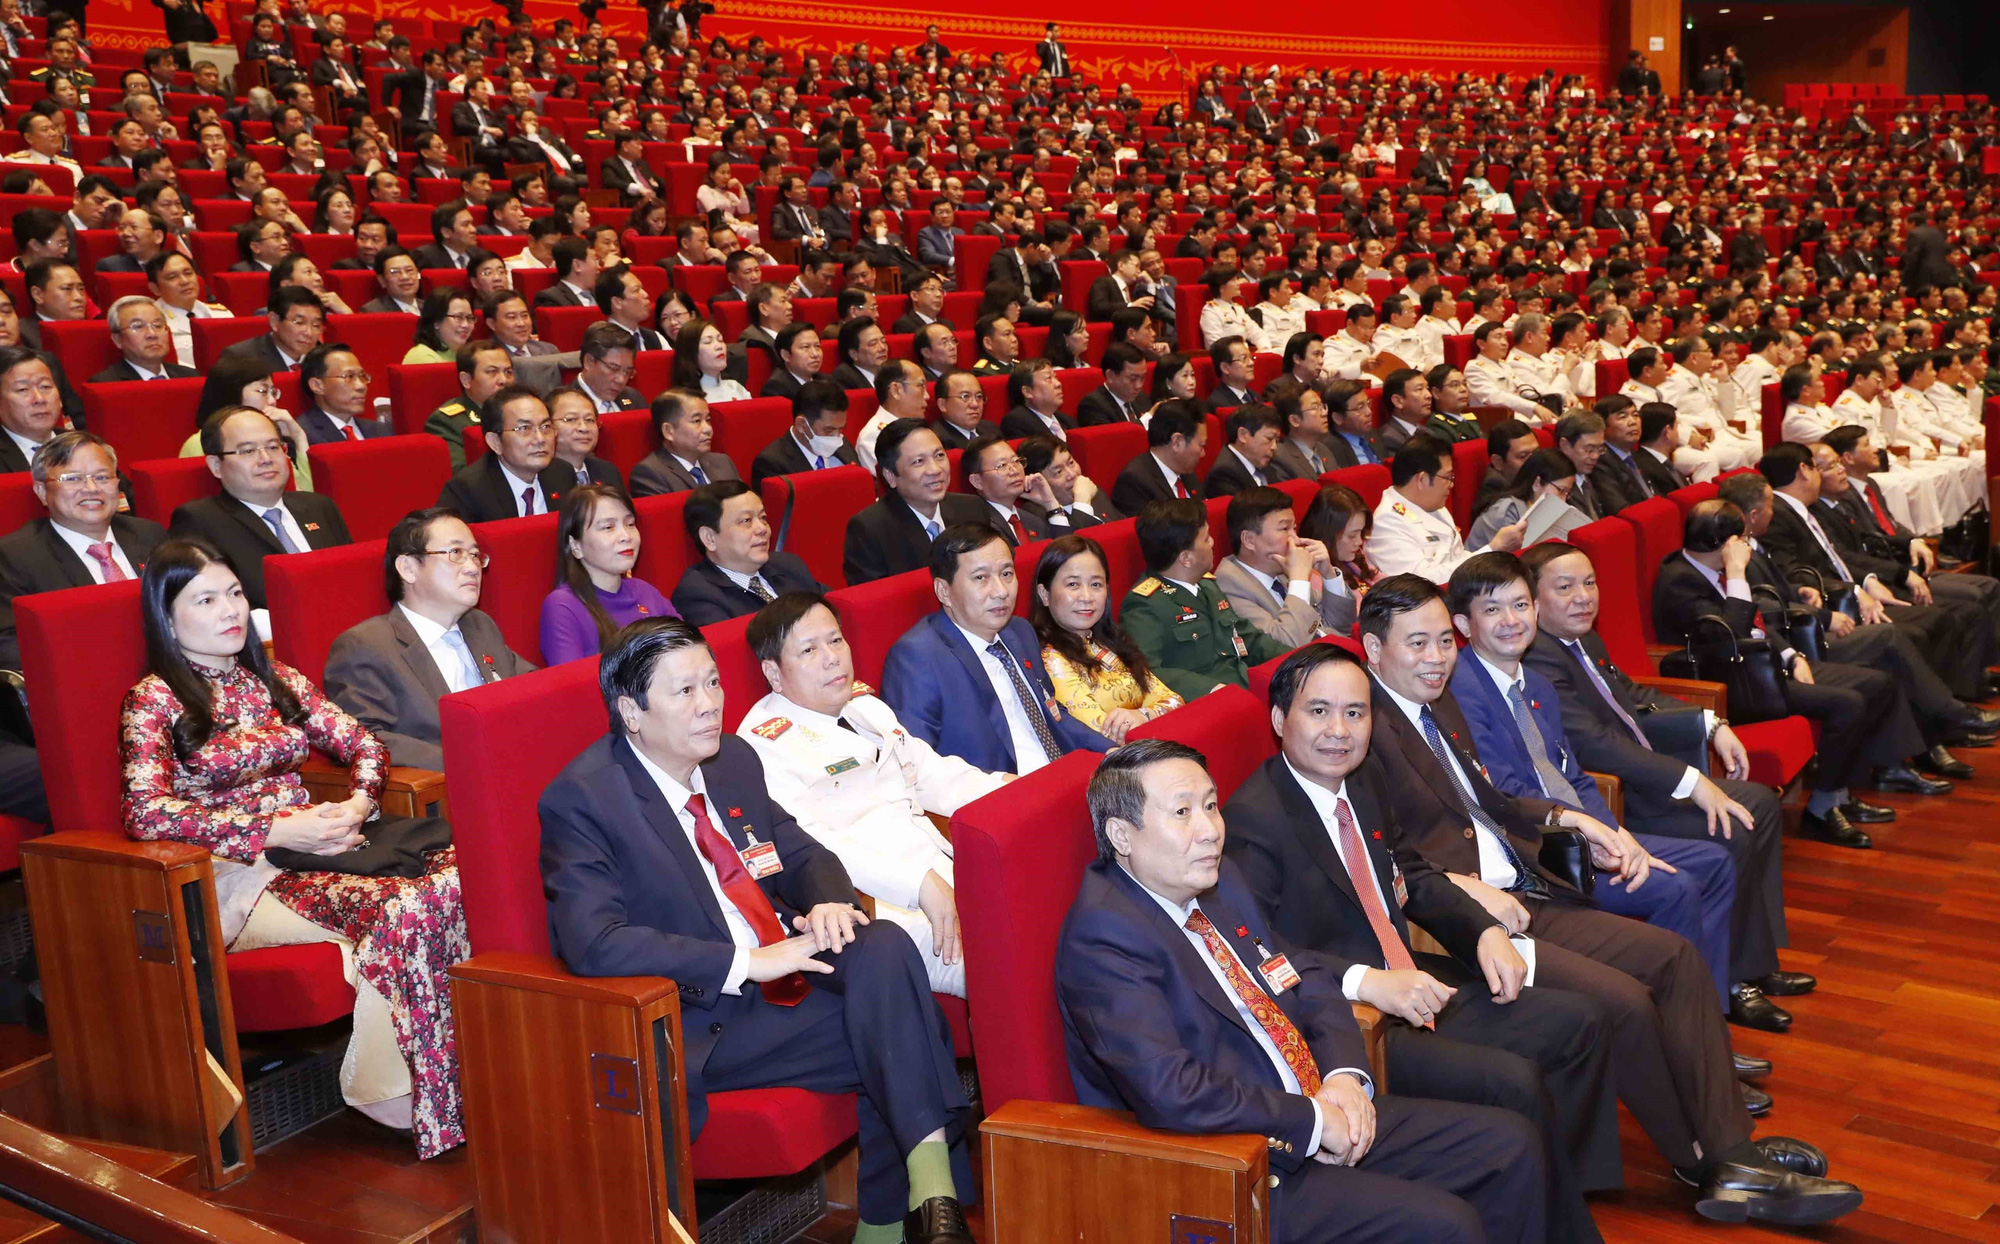 Delegates attend the preparatory session of Vietnam’s 13th National Party Congress in Hanoi, January 25, 2021. Photo: Vietnam News Agency